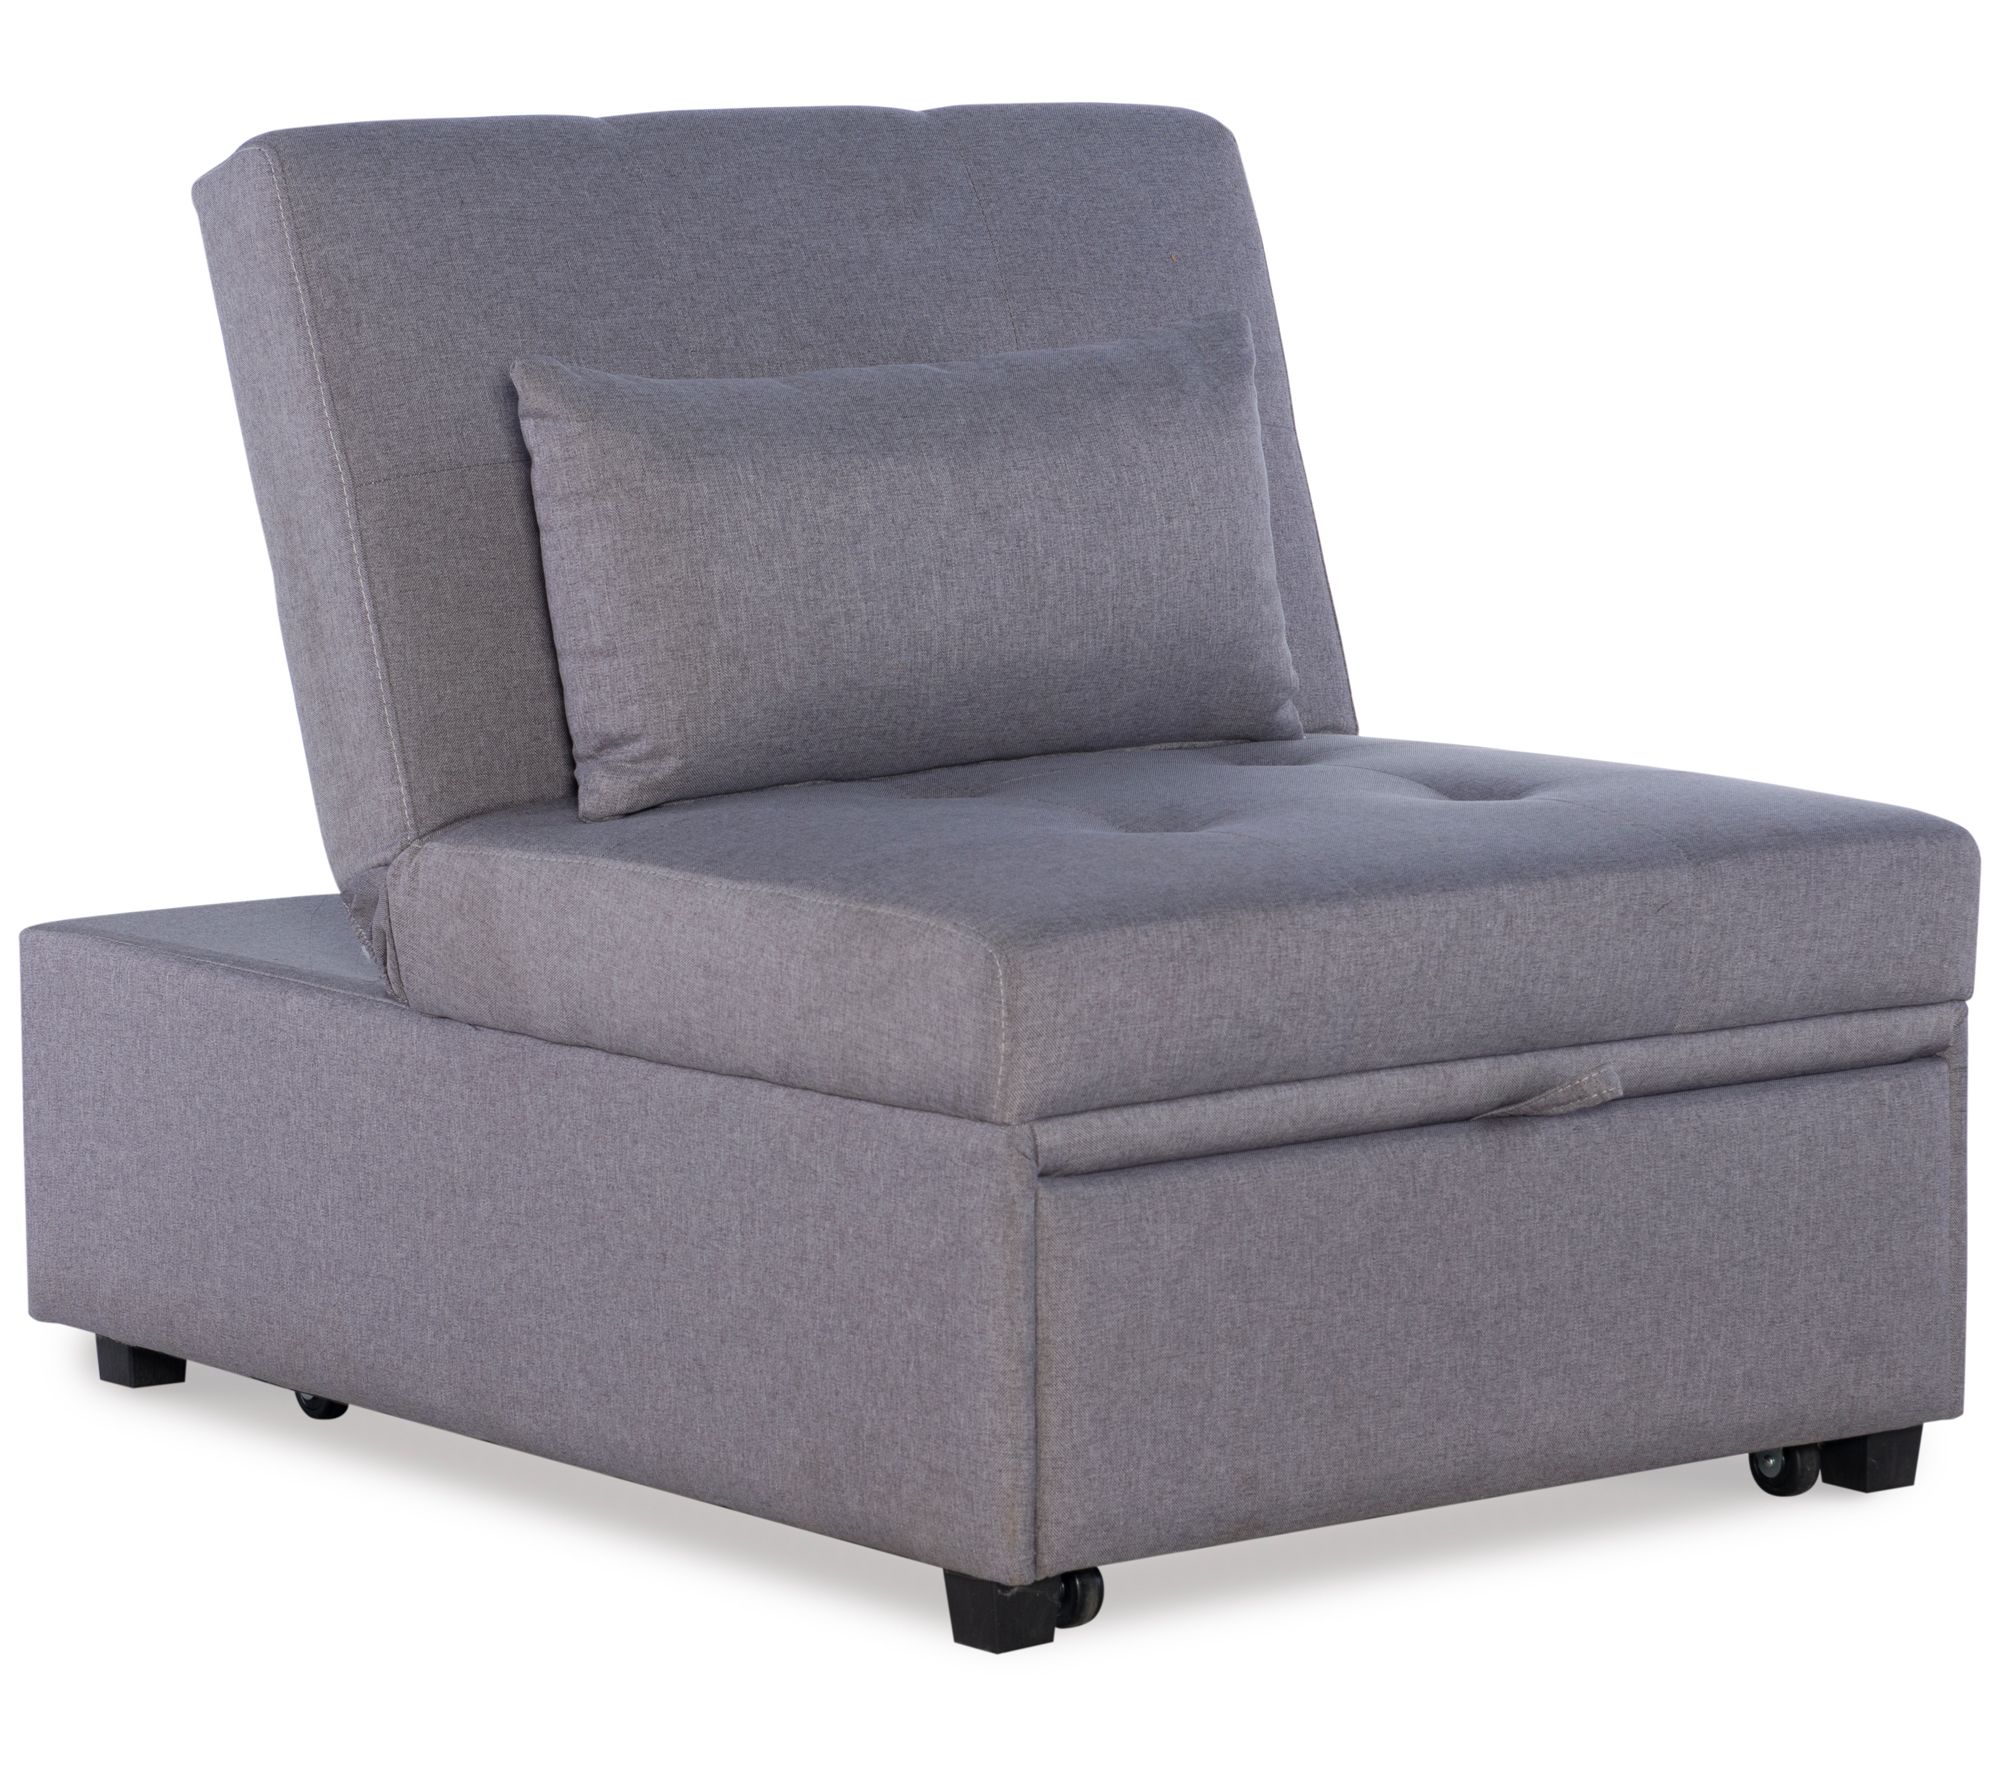 Dozer Convertible Twin Sofa Bed Qvc Com, Chair That Converts To A Twin Bed